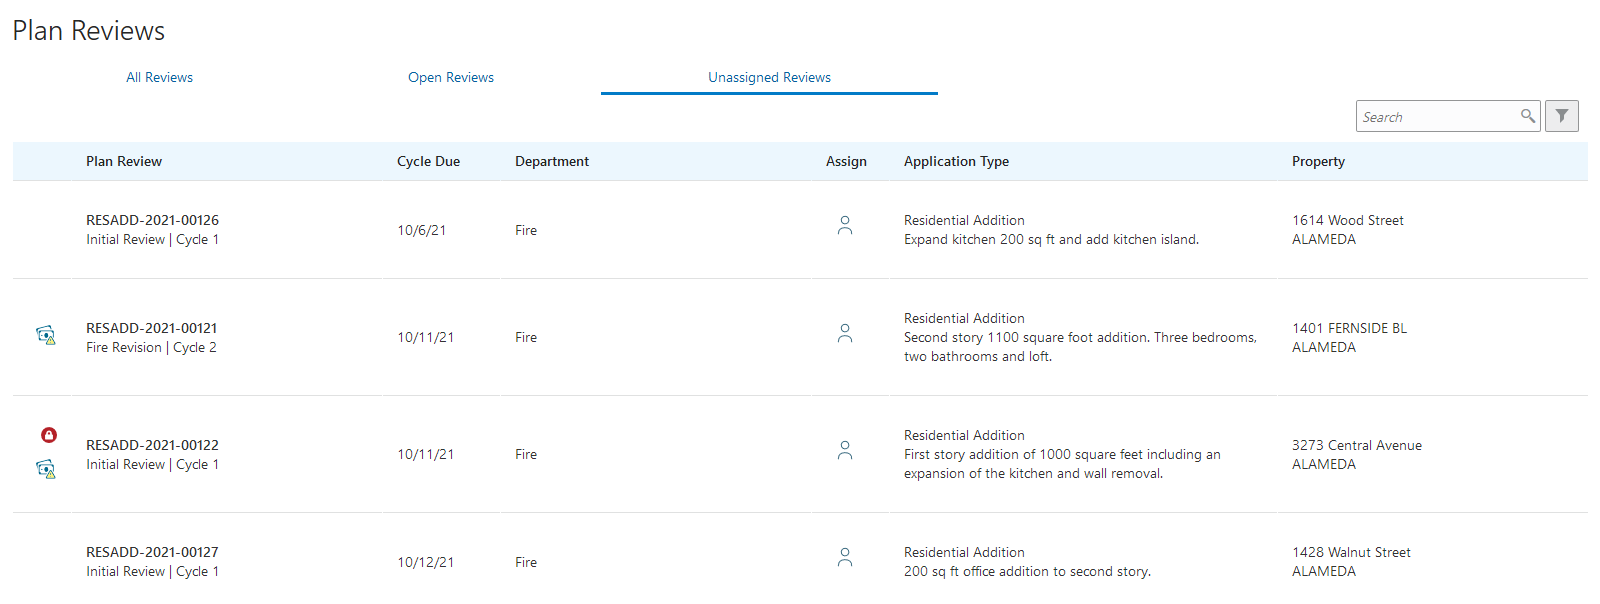 Plan Reviews - Unassigned Reviews page in the Plan Review Console